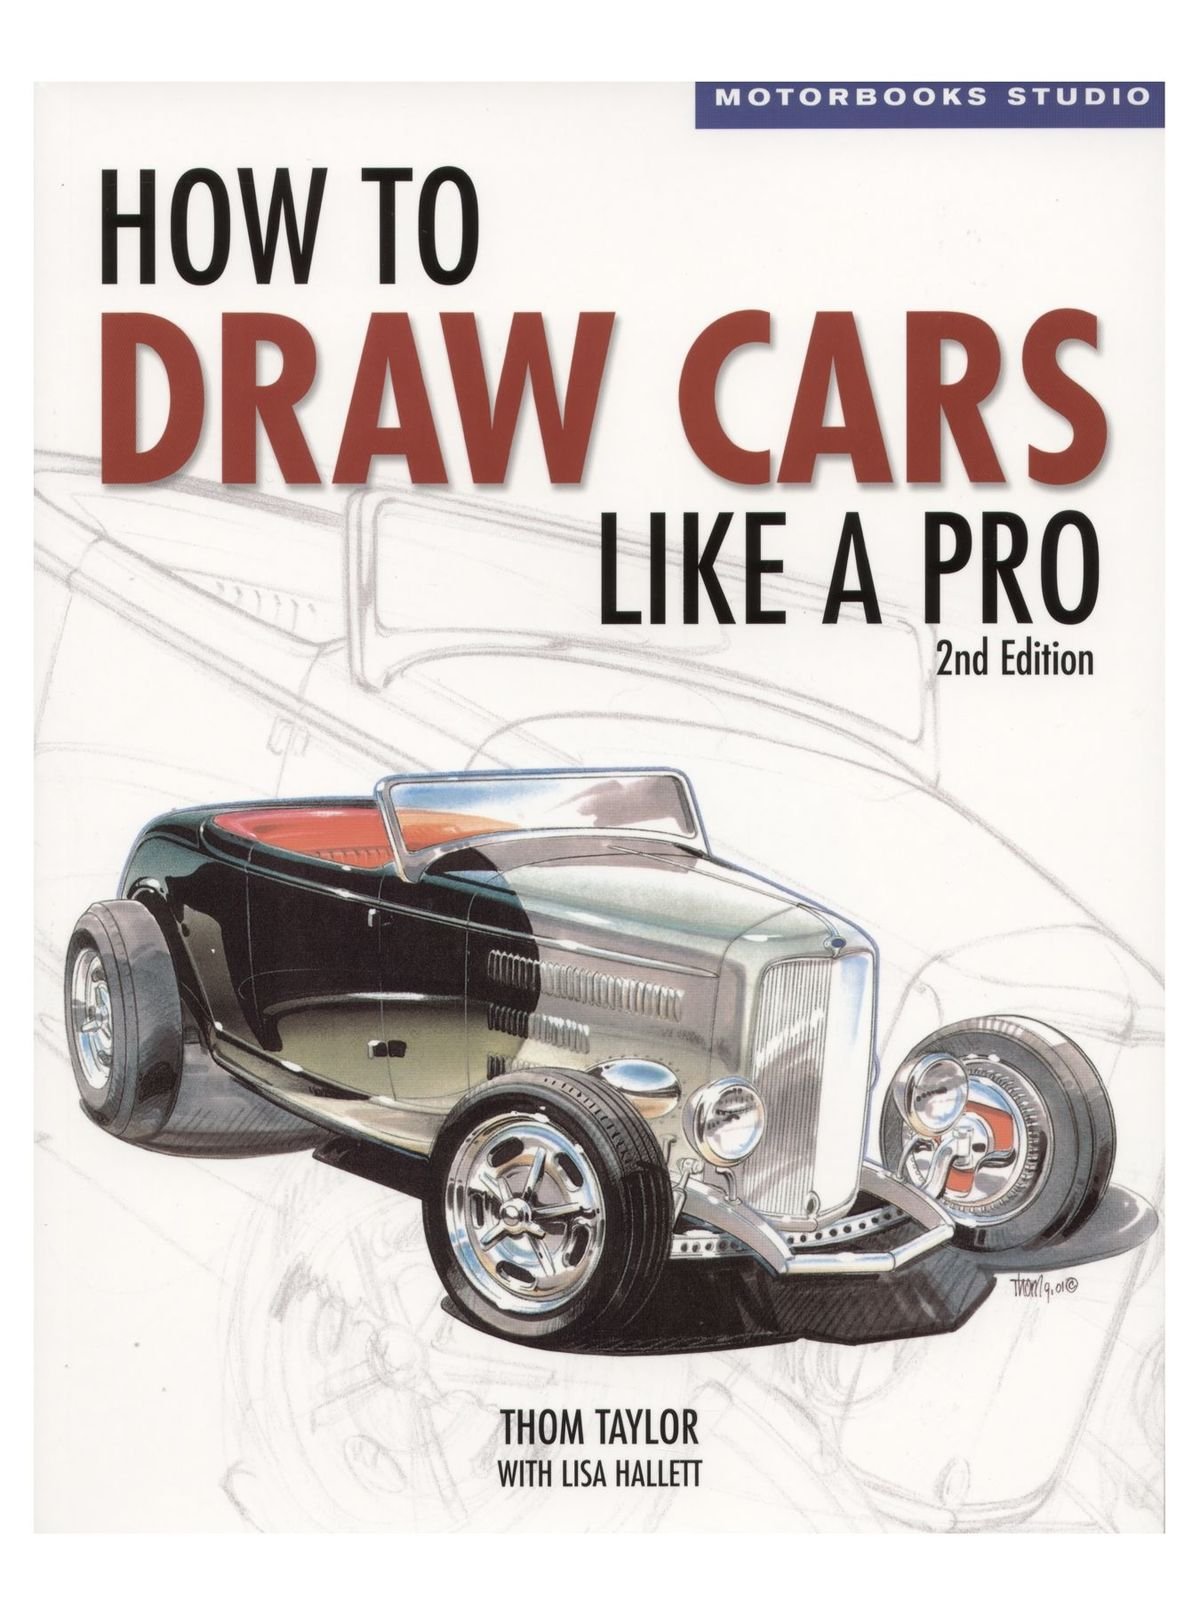 Motorbooks - How To Draw Cars Like a Pro